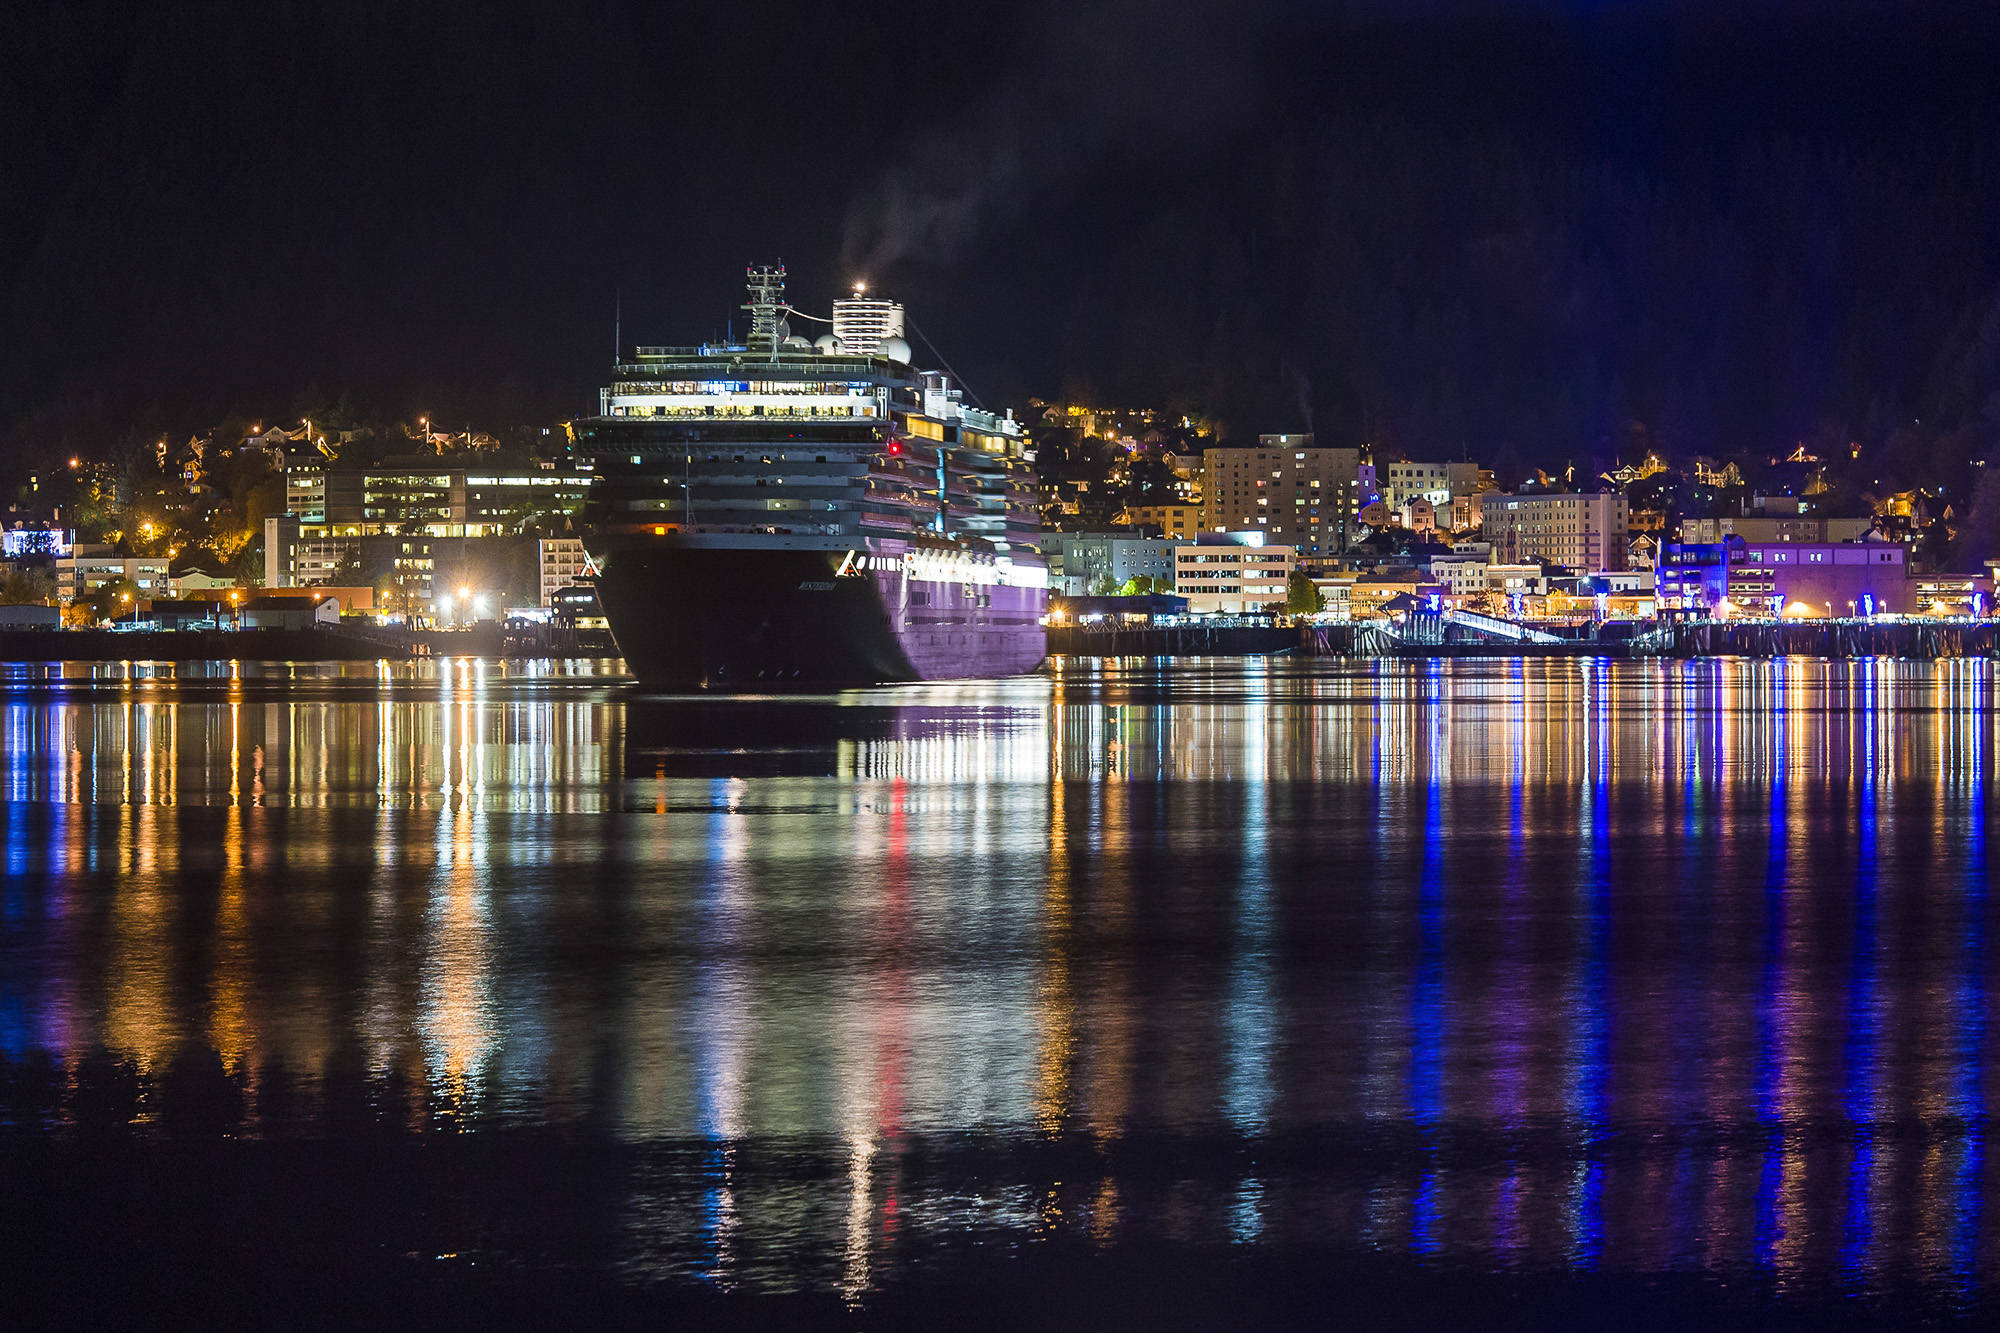 The Holland America Line cruise ship Westerdam slips out of Juneau’s downtown harbor just before 11 p.m. on Tuesday, Oct. 2, 2018. The Norwegian Pearl also visited Tuesday, the last day of the season. (Michael Penn | Juneau Empire)